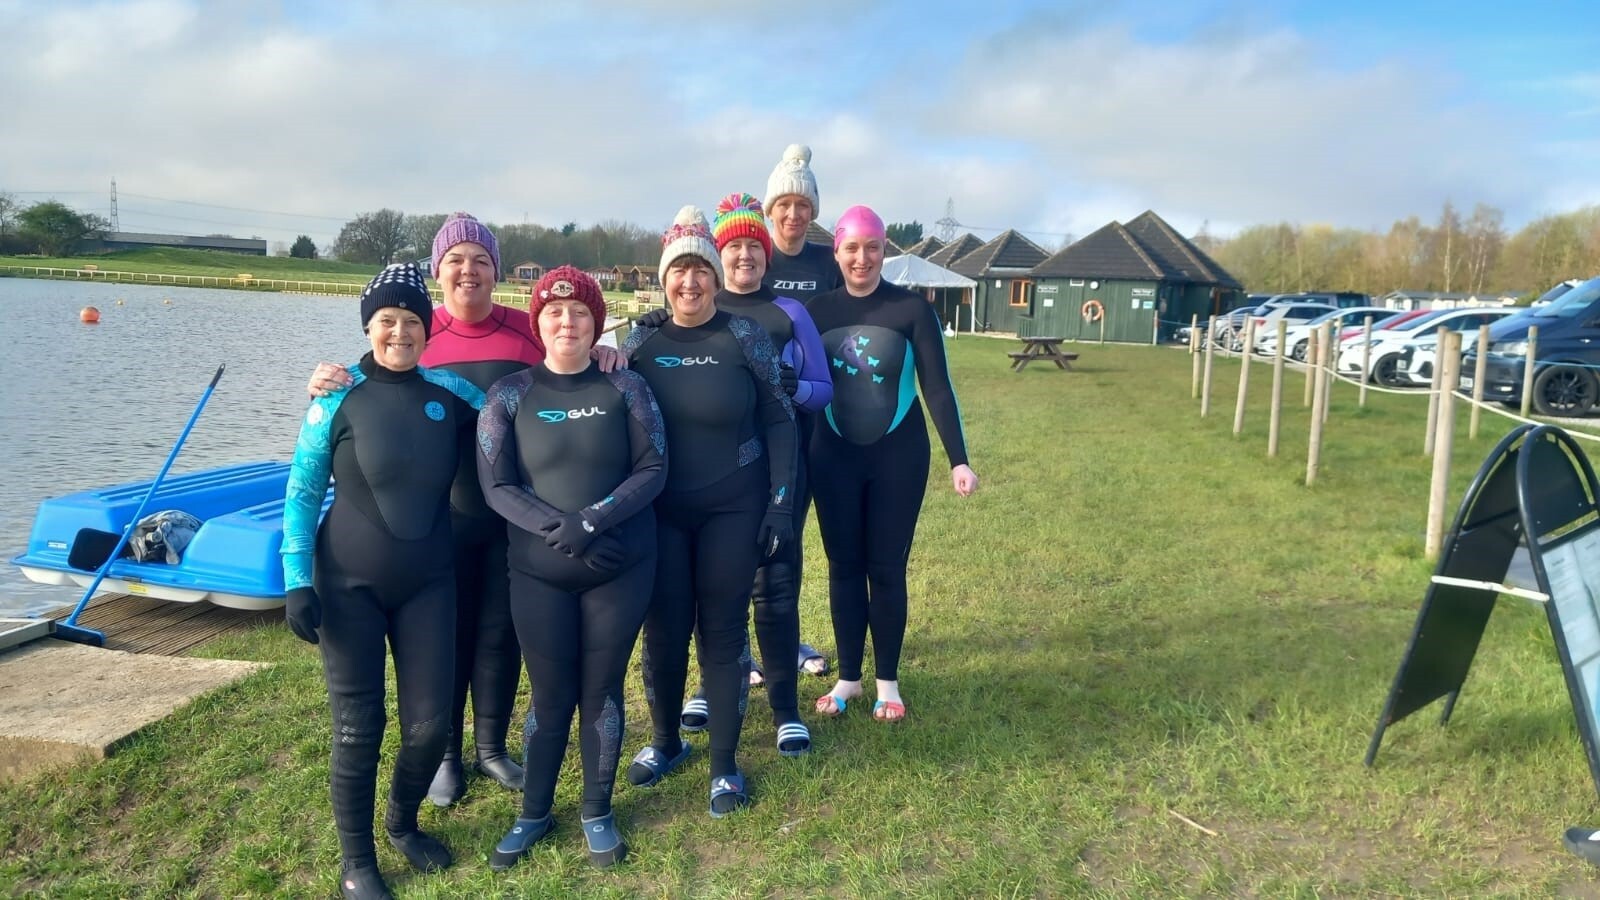 Blue Tits swimming group swim and sing their way to fundraising target